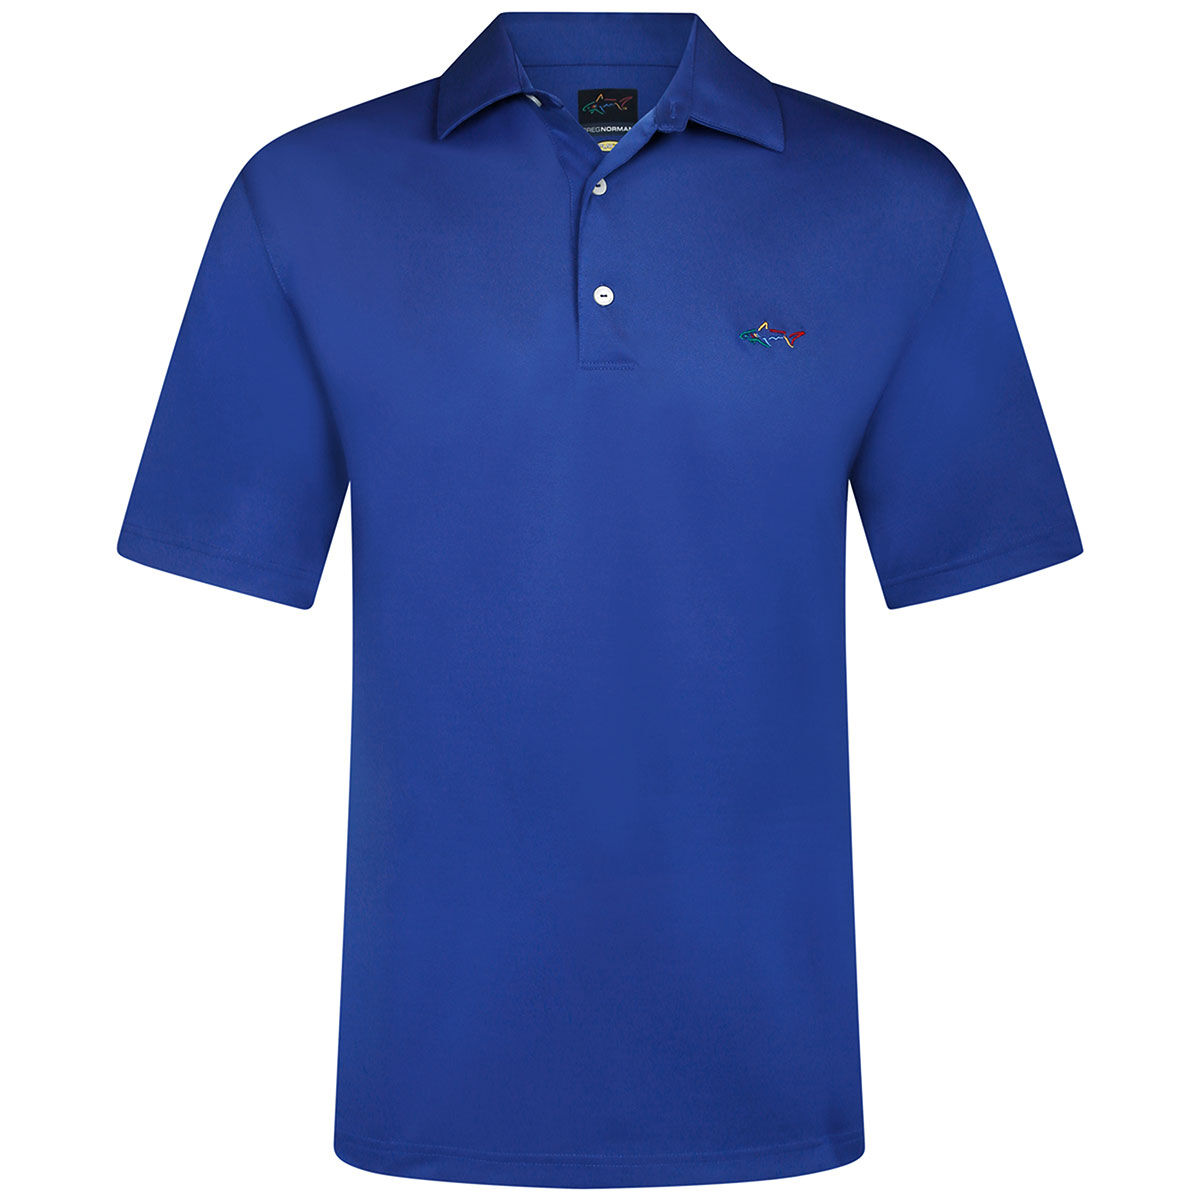 Greg Norman Blue Embroidered Shark Logo Golf Polo Shirt, Mens, Maritime | American Golf, Size: Large - Father's Day Gift von Greg Norman